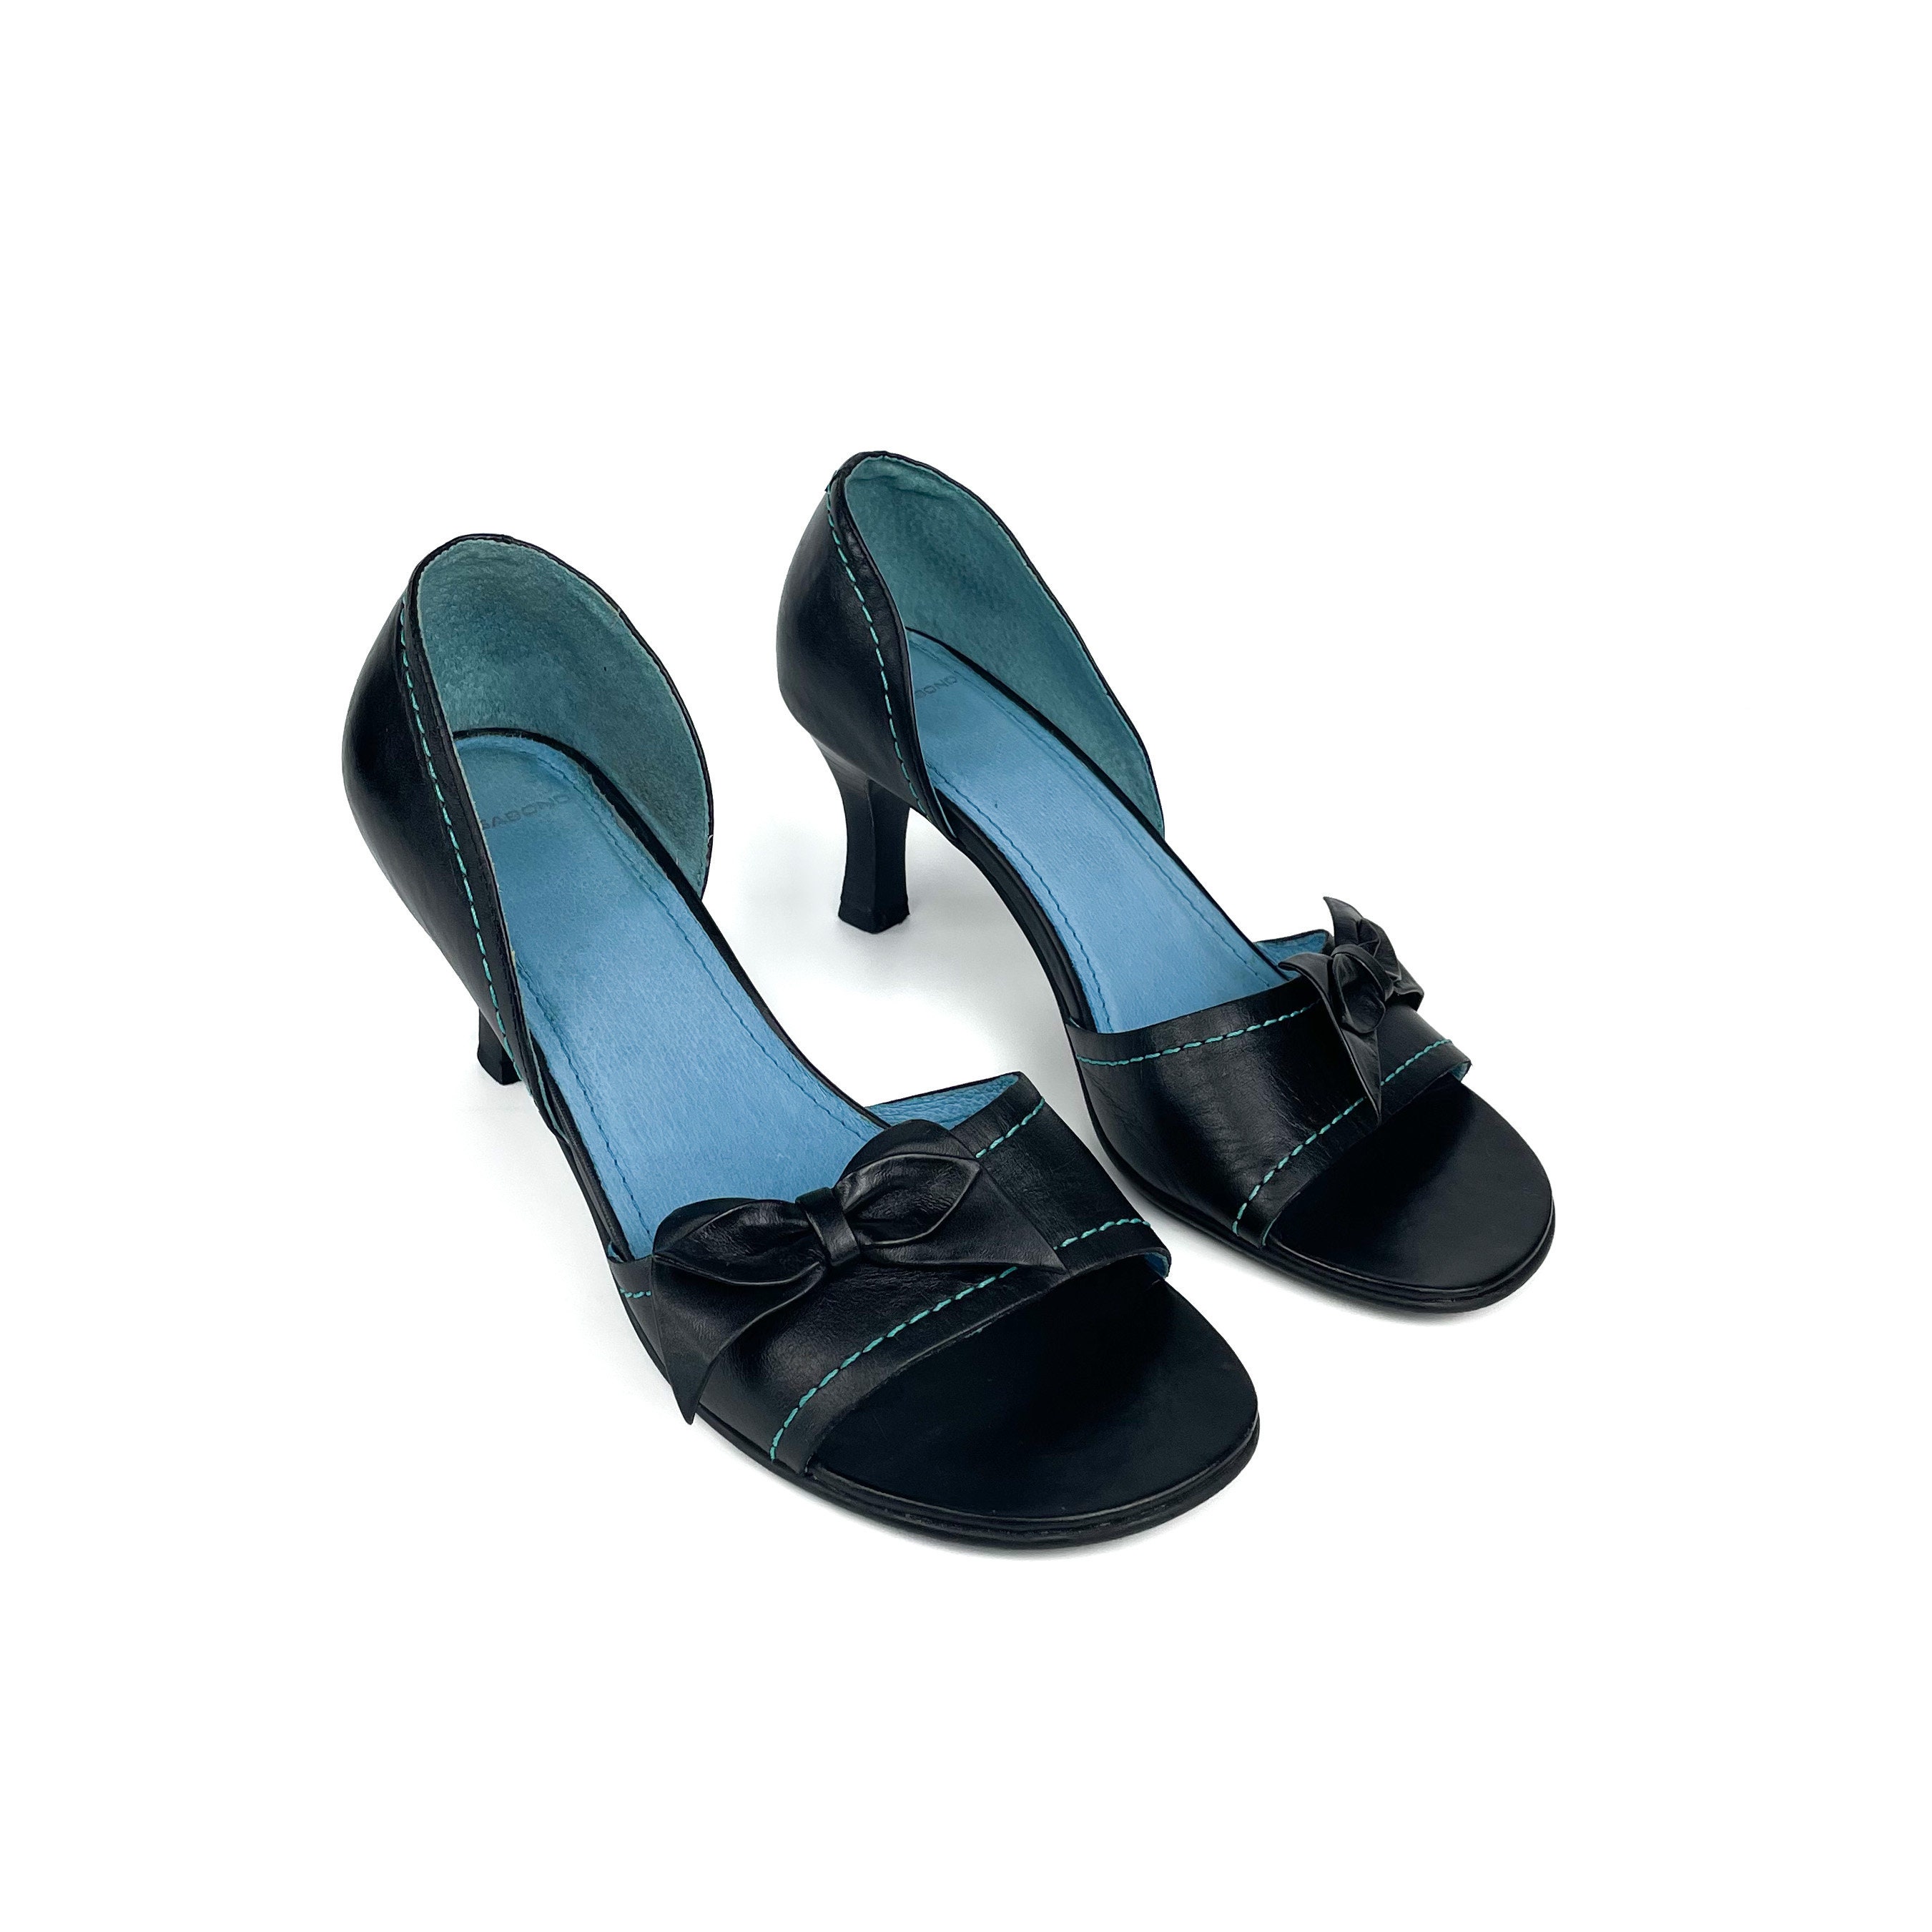 Buy Black Peep Toe Block Heels by THE ALTER Online at Aza Fashions.